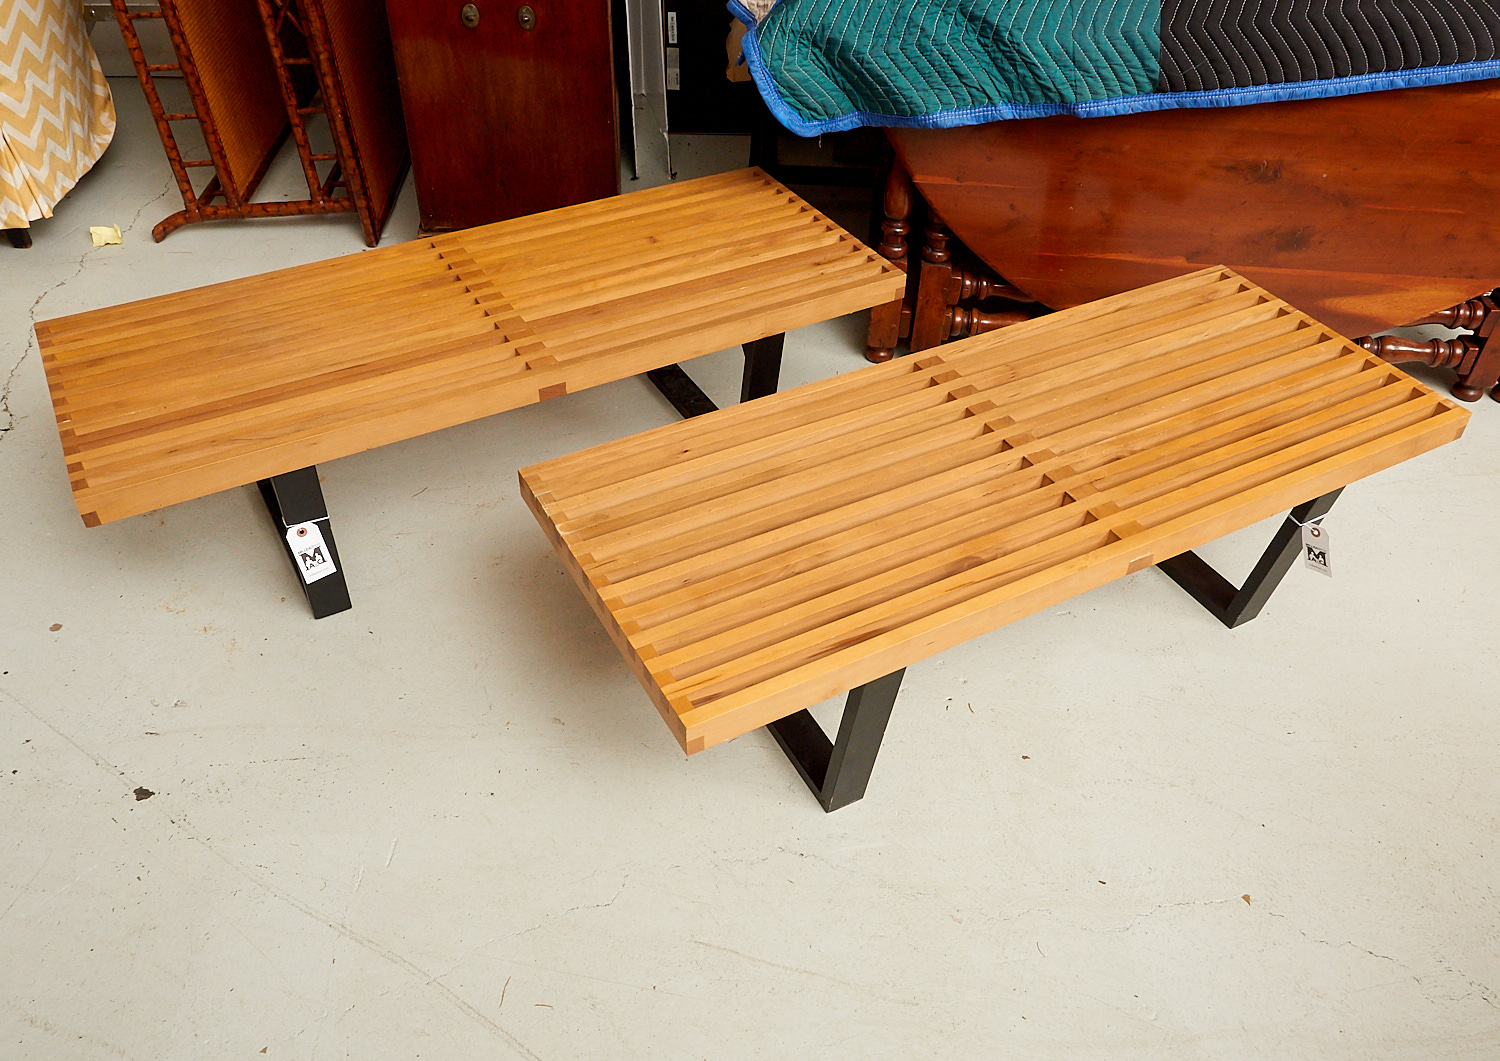 PAIR GEORGE NELSON STYLE SLAT BENCHES 2cedb3